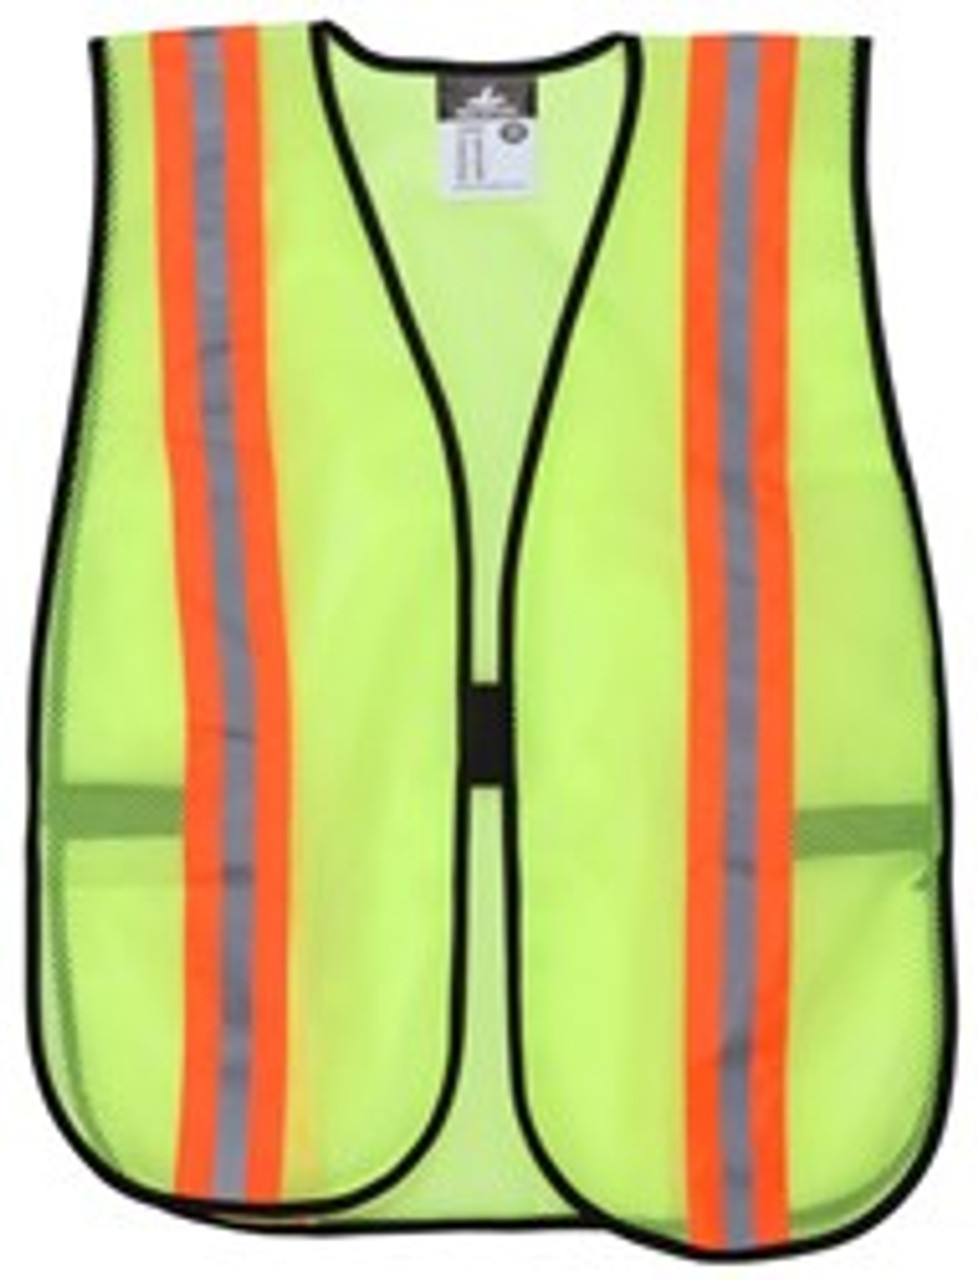 Safety Vest Mesh Cloth Reflective Jacket High Visibility for